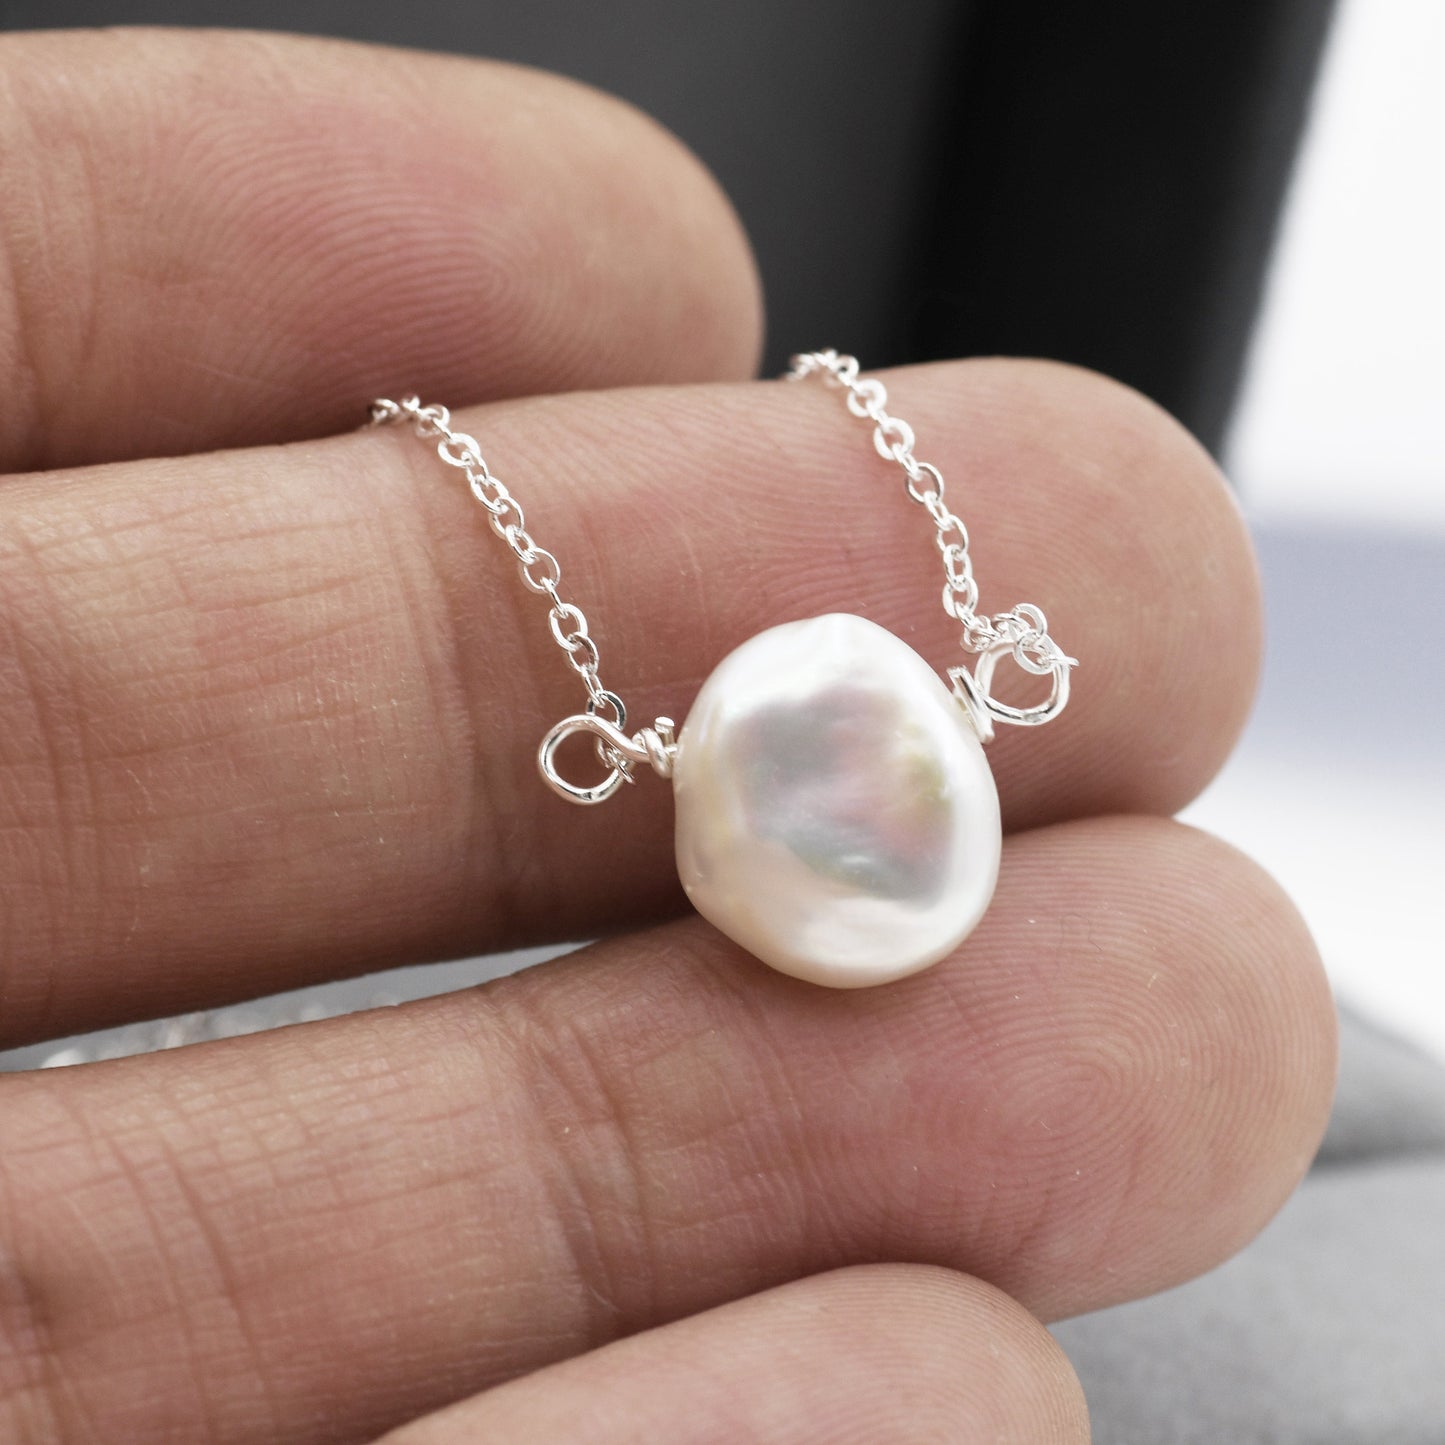 Baroque Pearl Necklace in Sterling Silver, Irregular Shape Keshi Pearl Necklace, Natural Freshwater Pearl Necklace